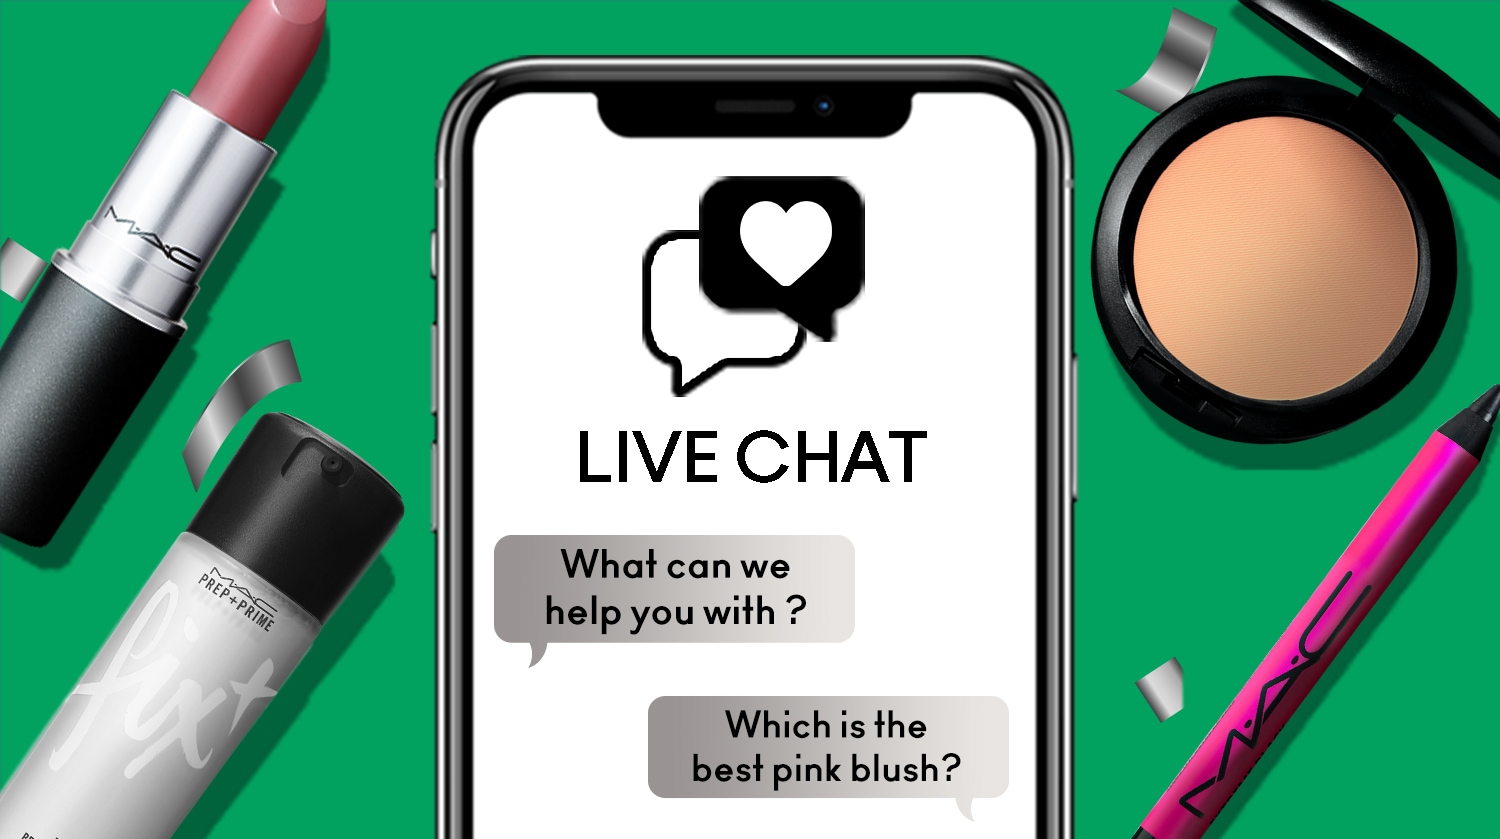 LIVE CHAT